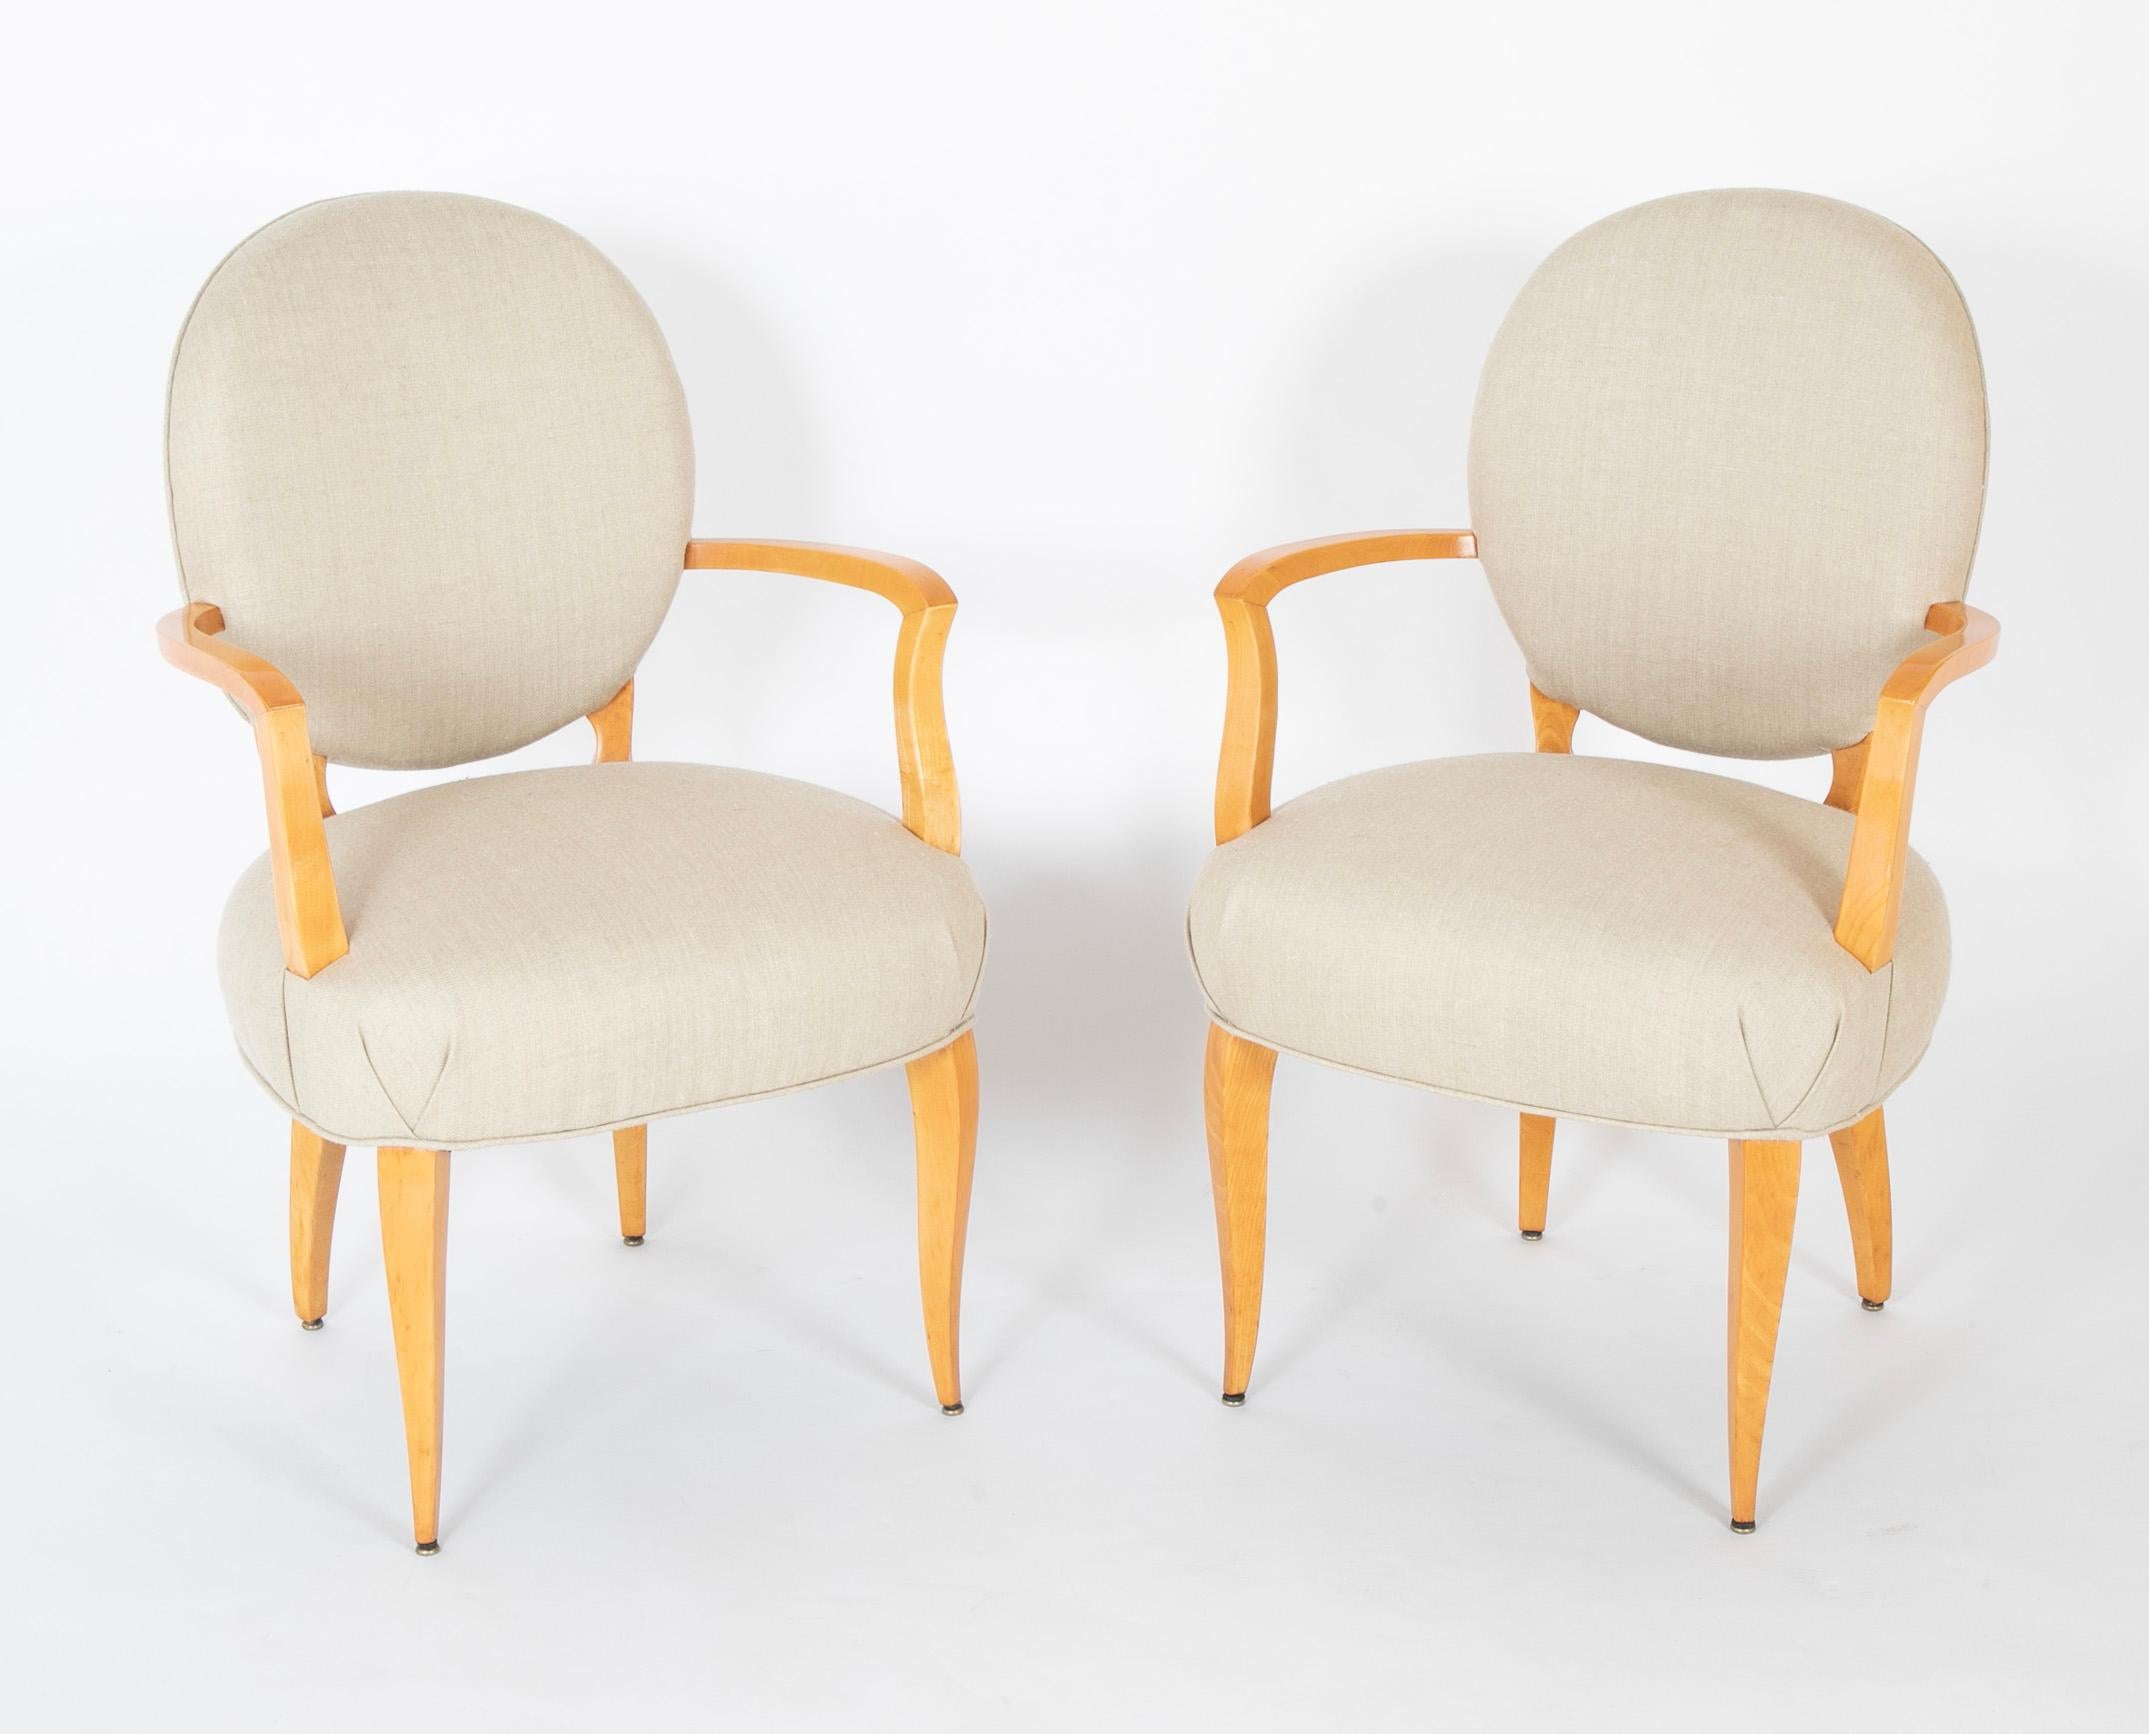 A pair of Sycamore open armchairs attributed to Raphael Raffel (French, 1912-2000) newly upholstered in Rogers & Goffgon fabric.  Circa 1940's-1950's.